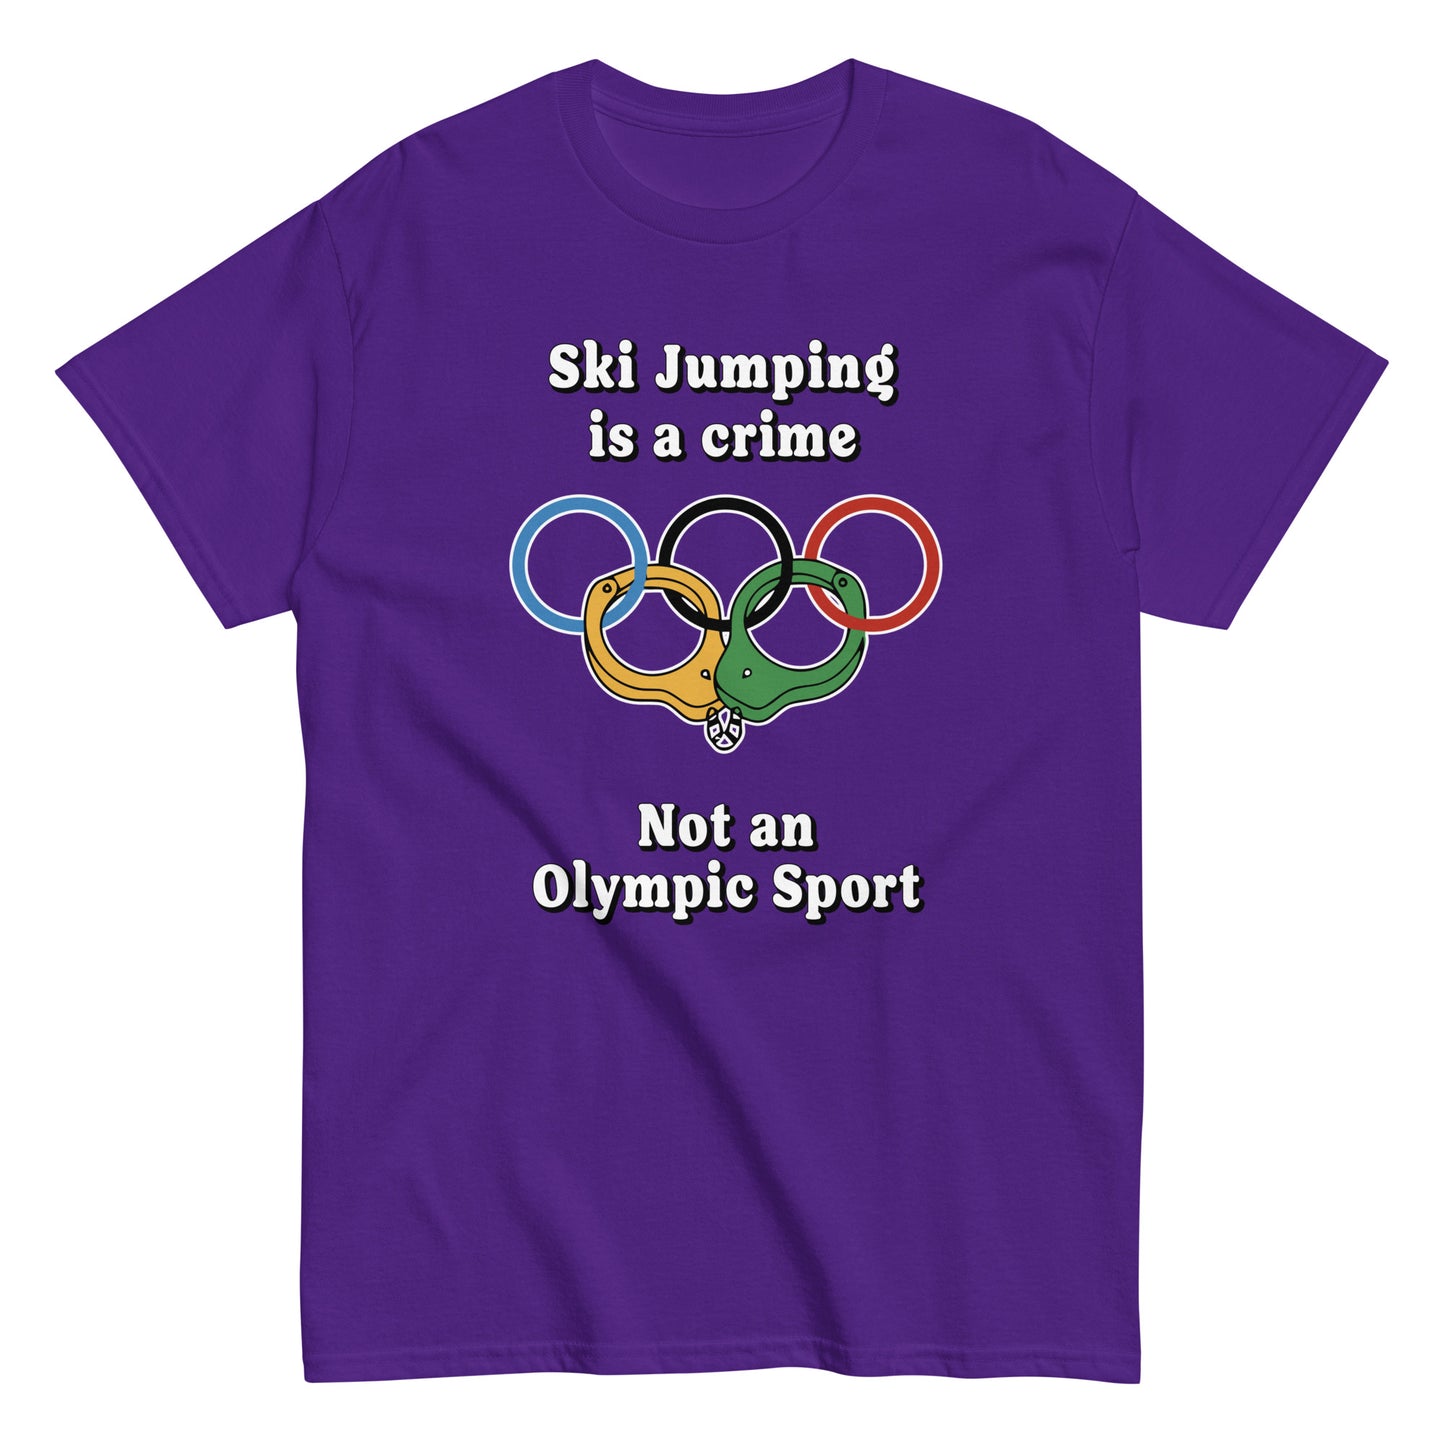 Ski Jumping is a crime not an olympic sport design printed on a t-shirt by Whistler Shirts